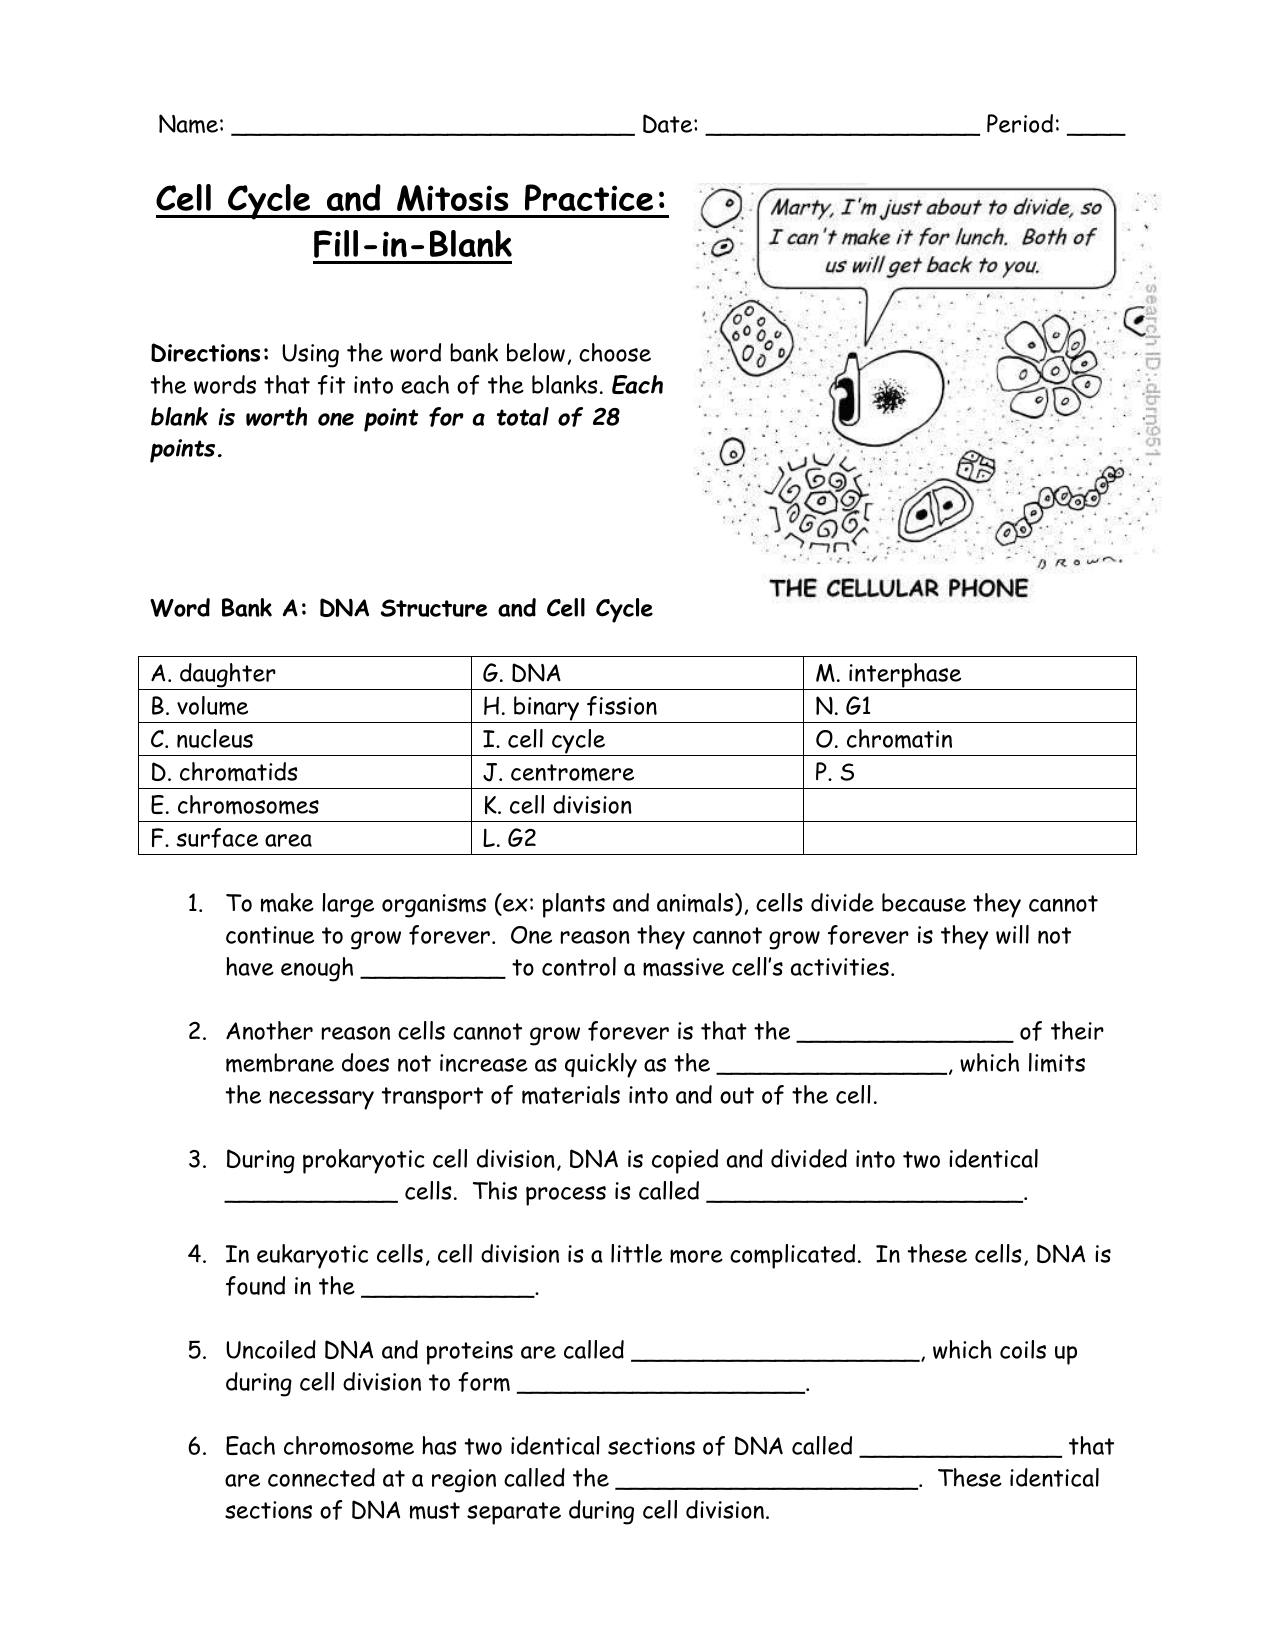 Mitosis Fill-in-the-Blank Worksheet In The Cell Cycle Worksheet